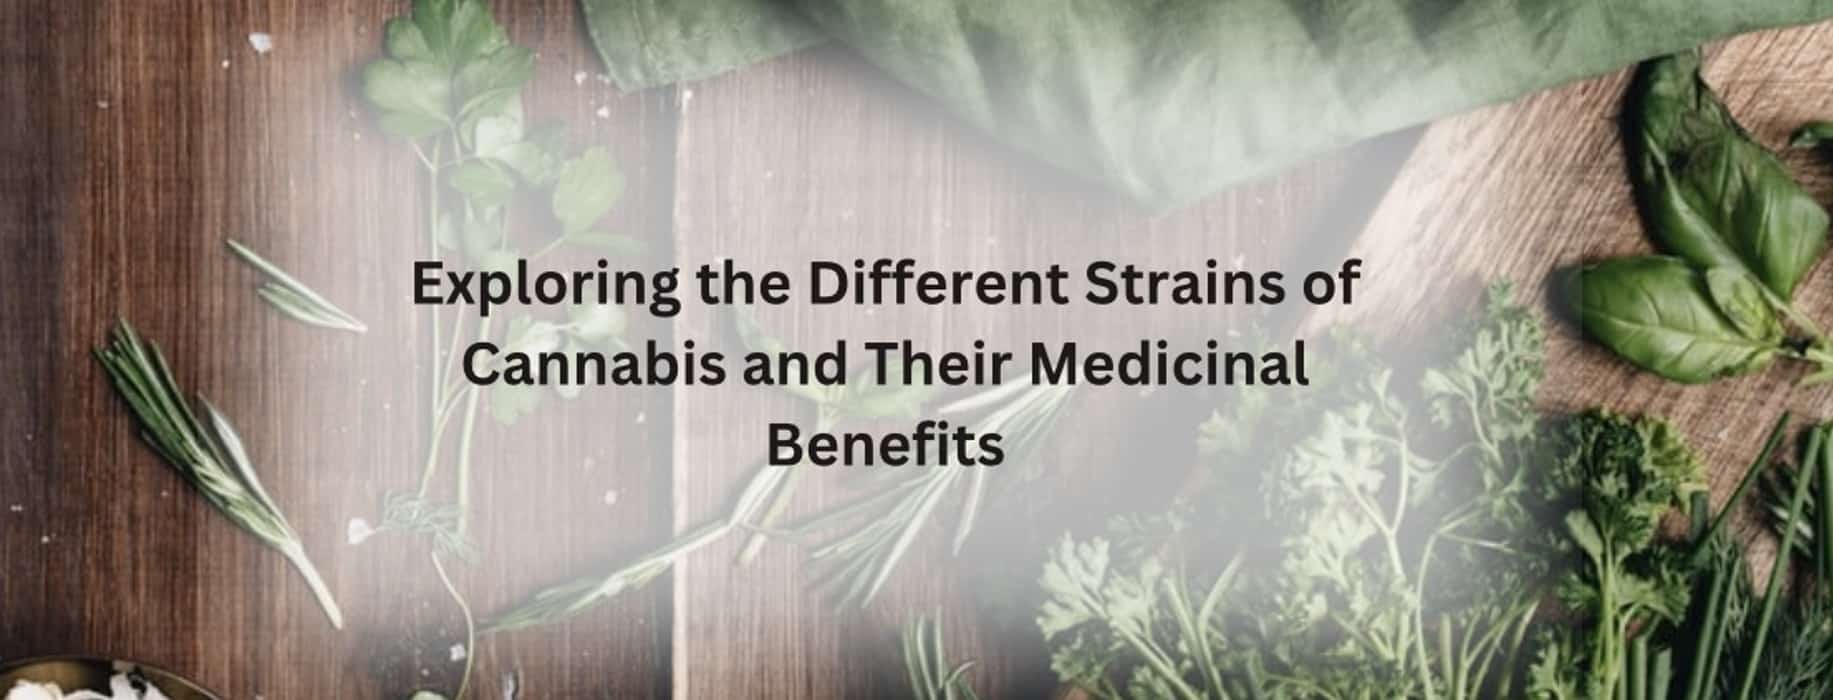 Exploring the Different Strains of Cannabis and Their Medicinal Benefits